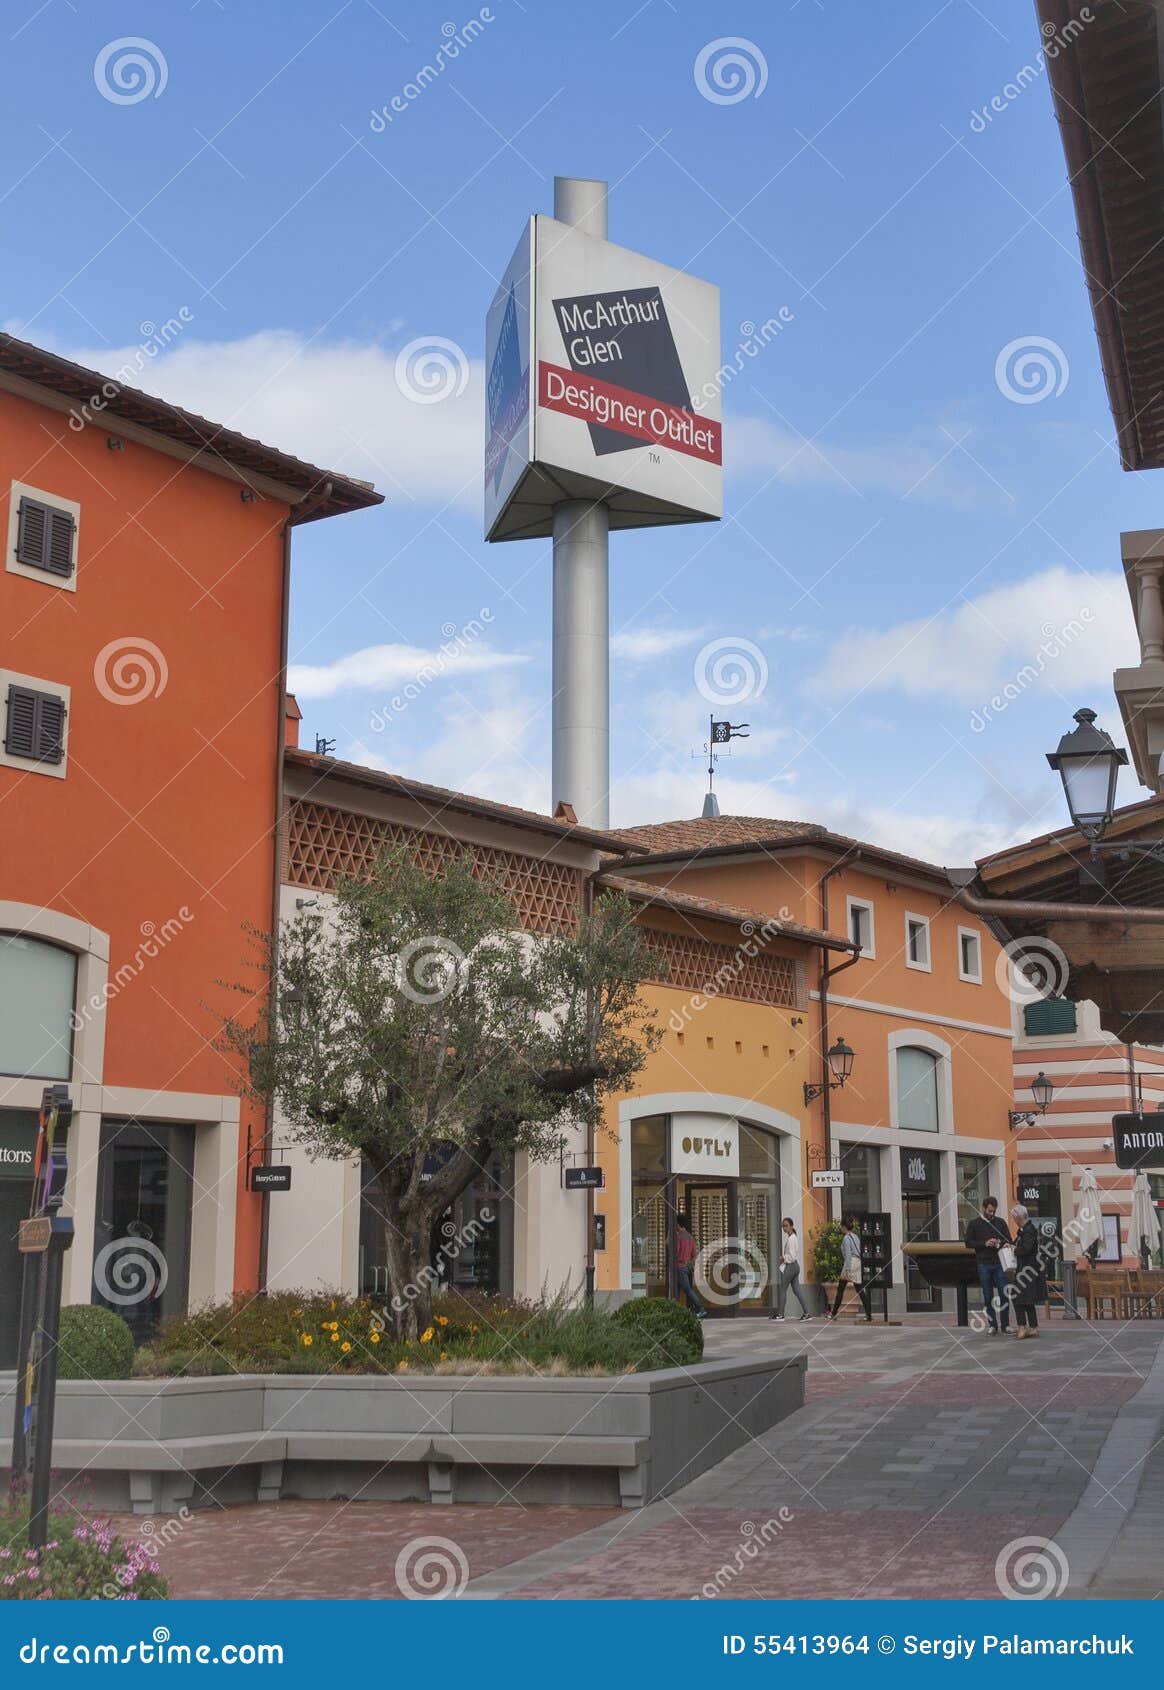 McArthurGlen Designer Outlet Barberino In Italy Editorial Stock Image - Image of discount ...